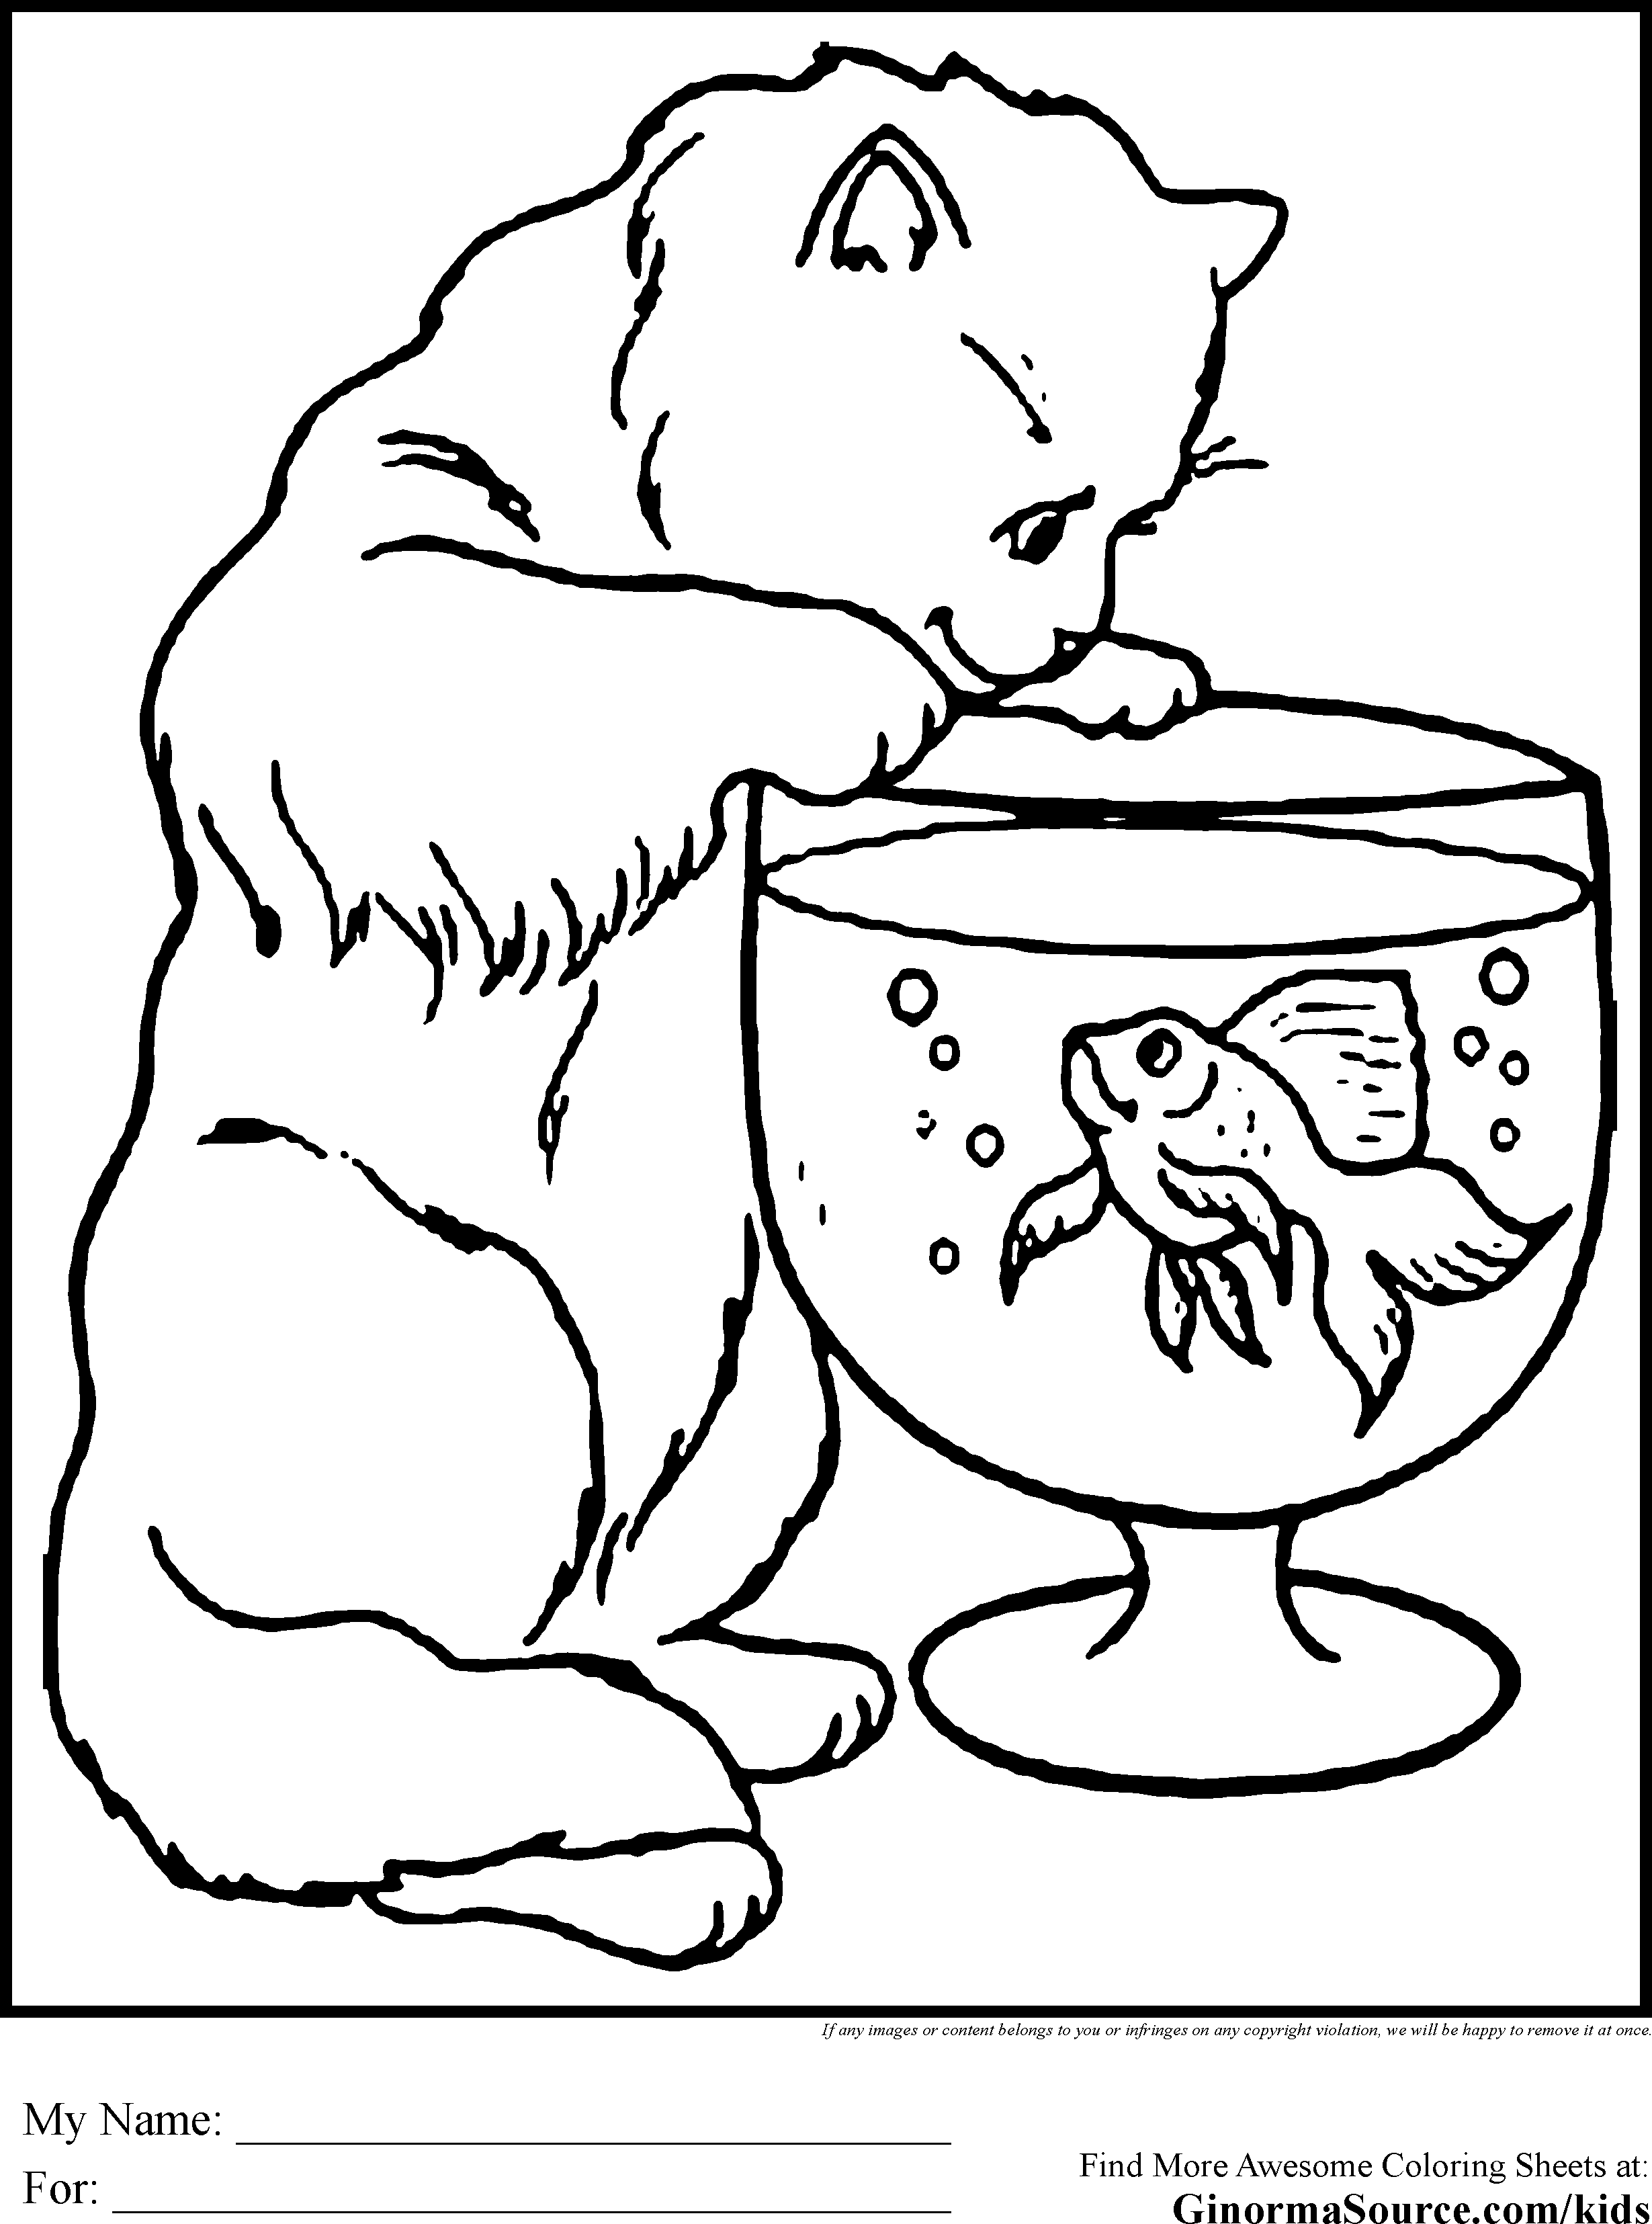 Coloring Pages For Dementia Patients Coloring Pages